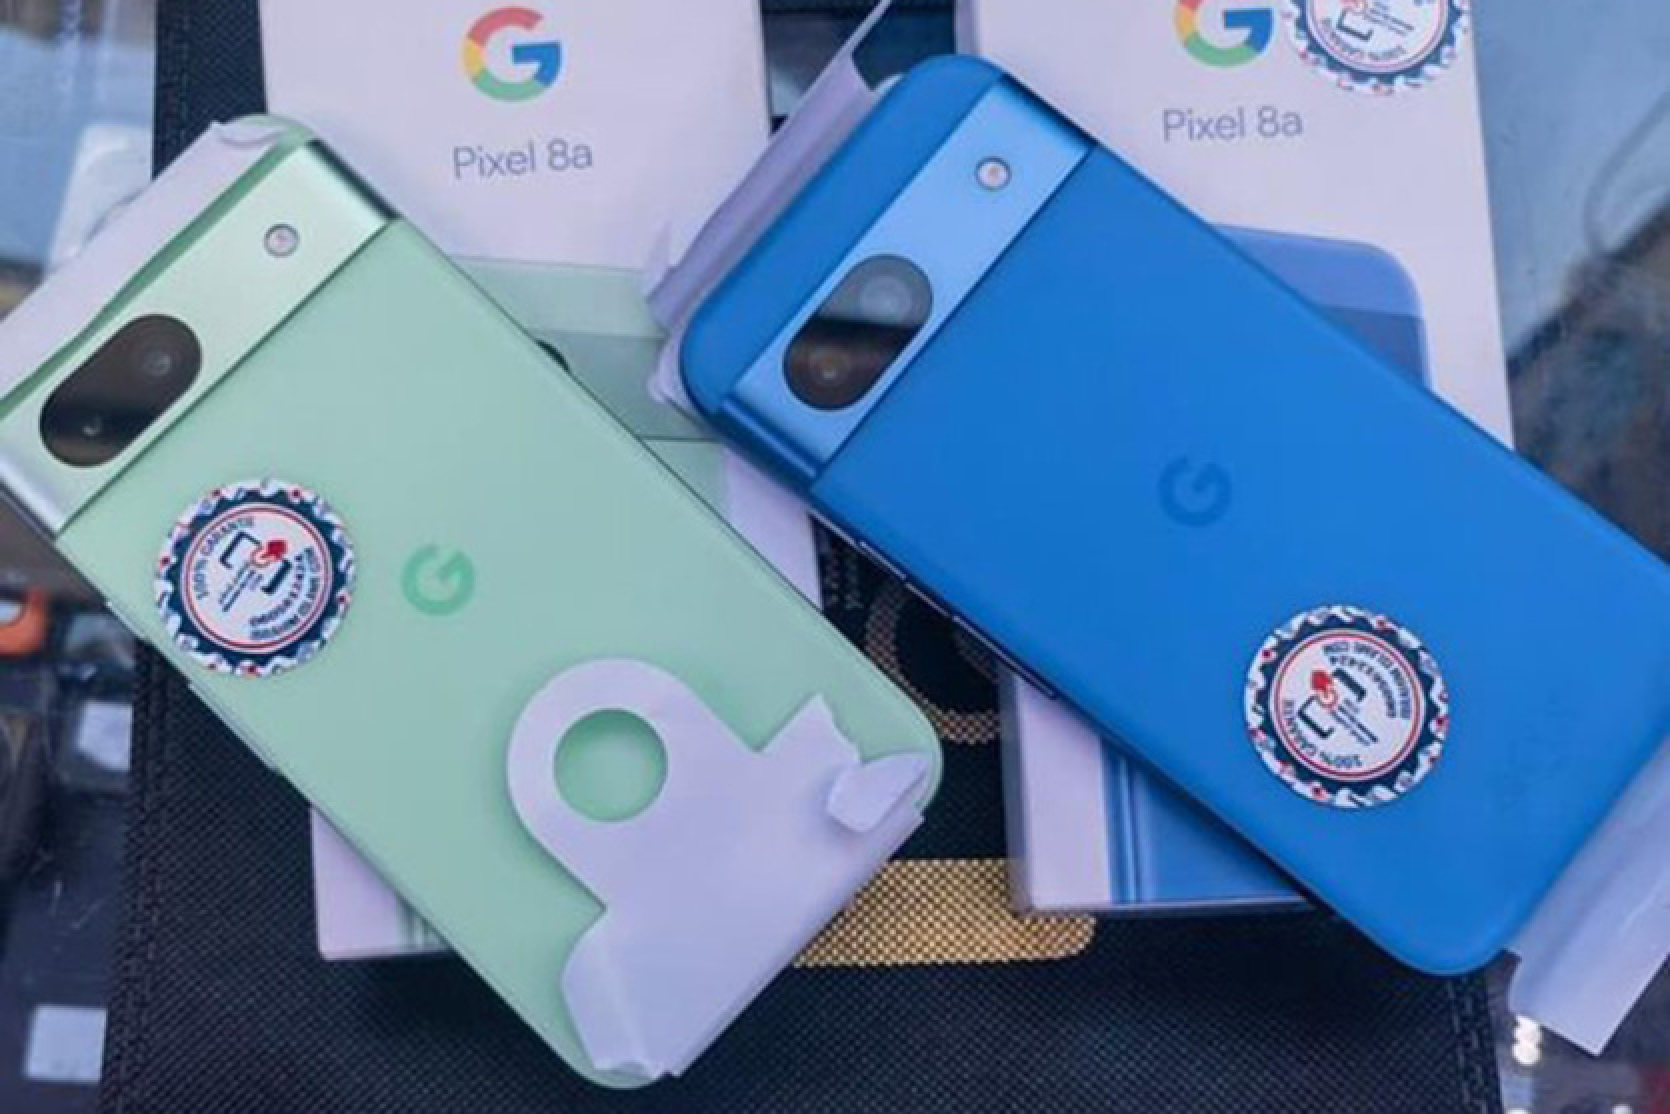 Google Pixel 8a smartphone first appeared on video - it's due out on May 14